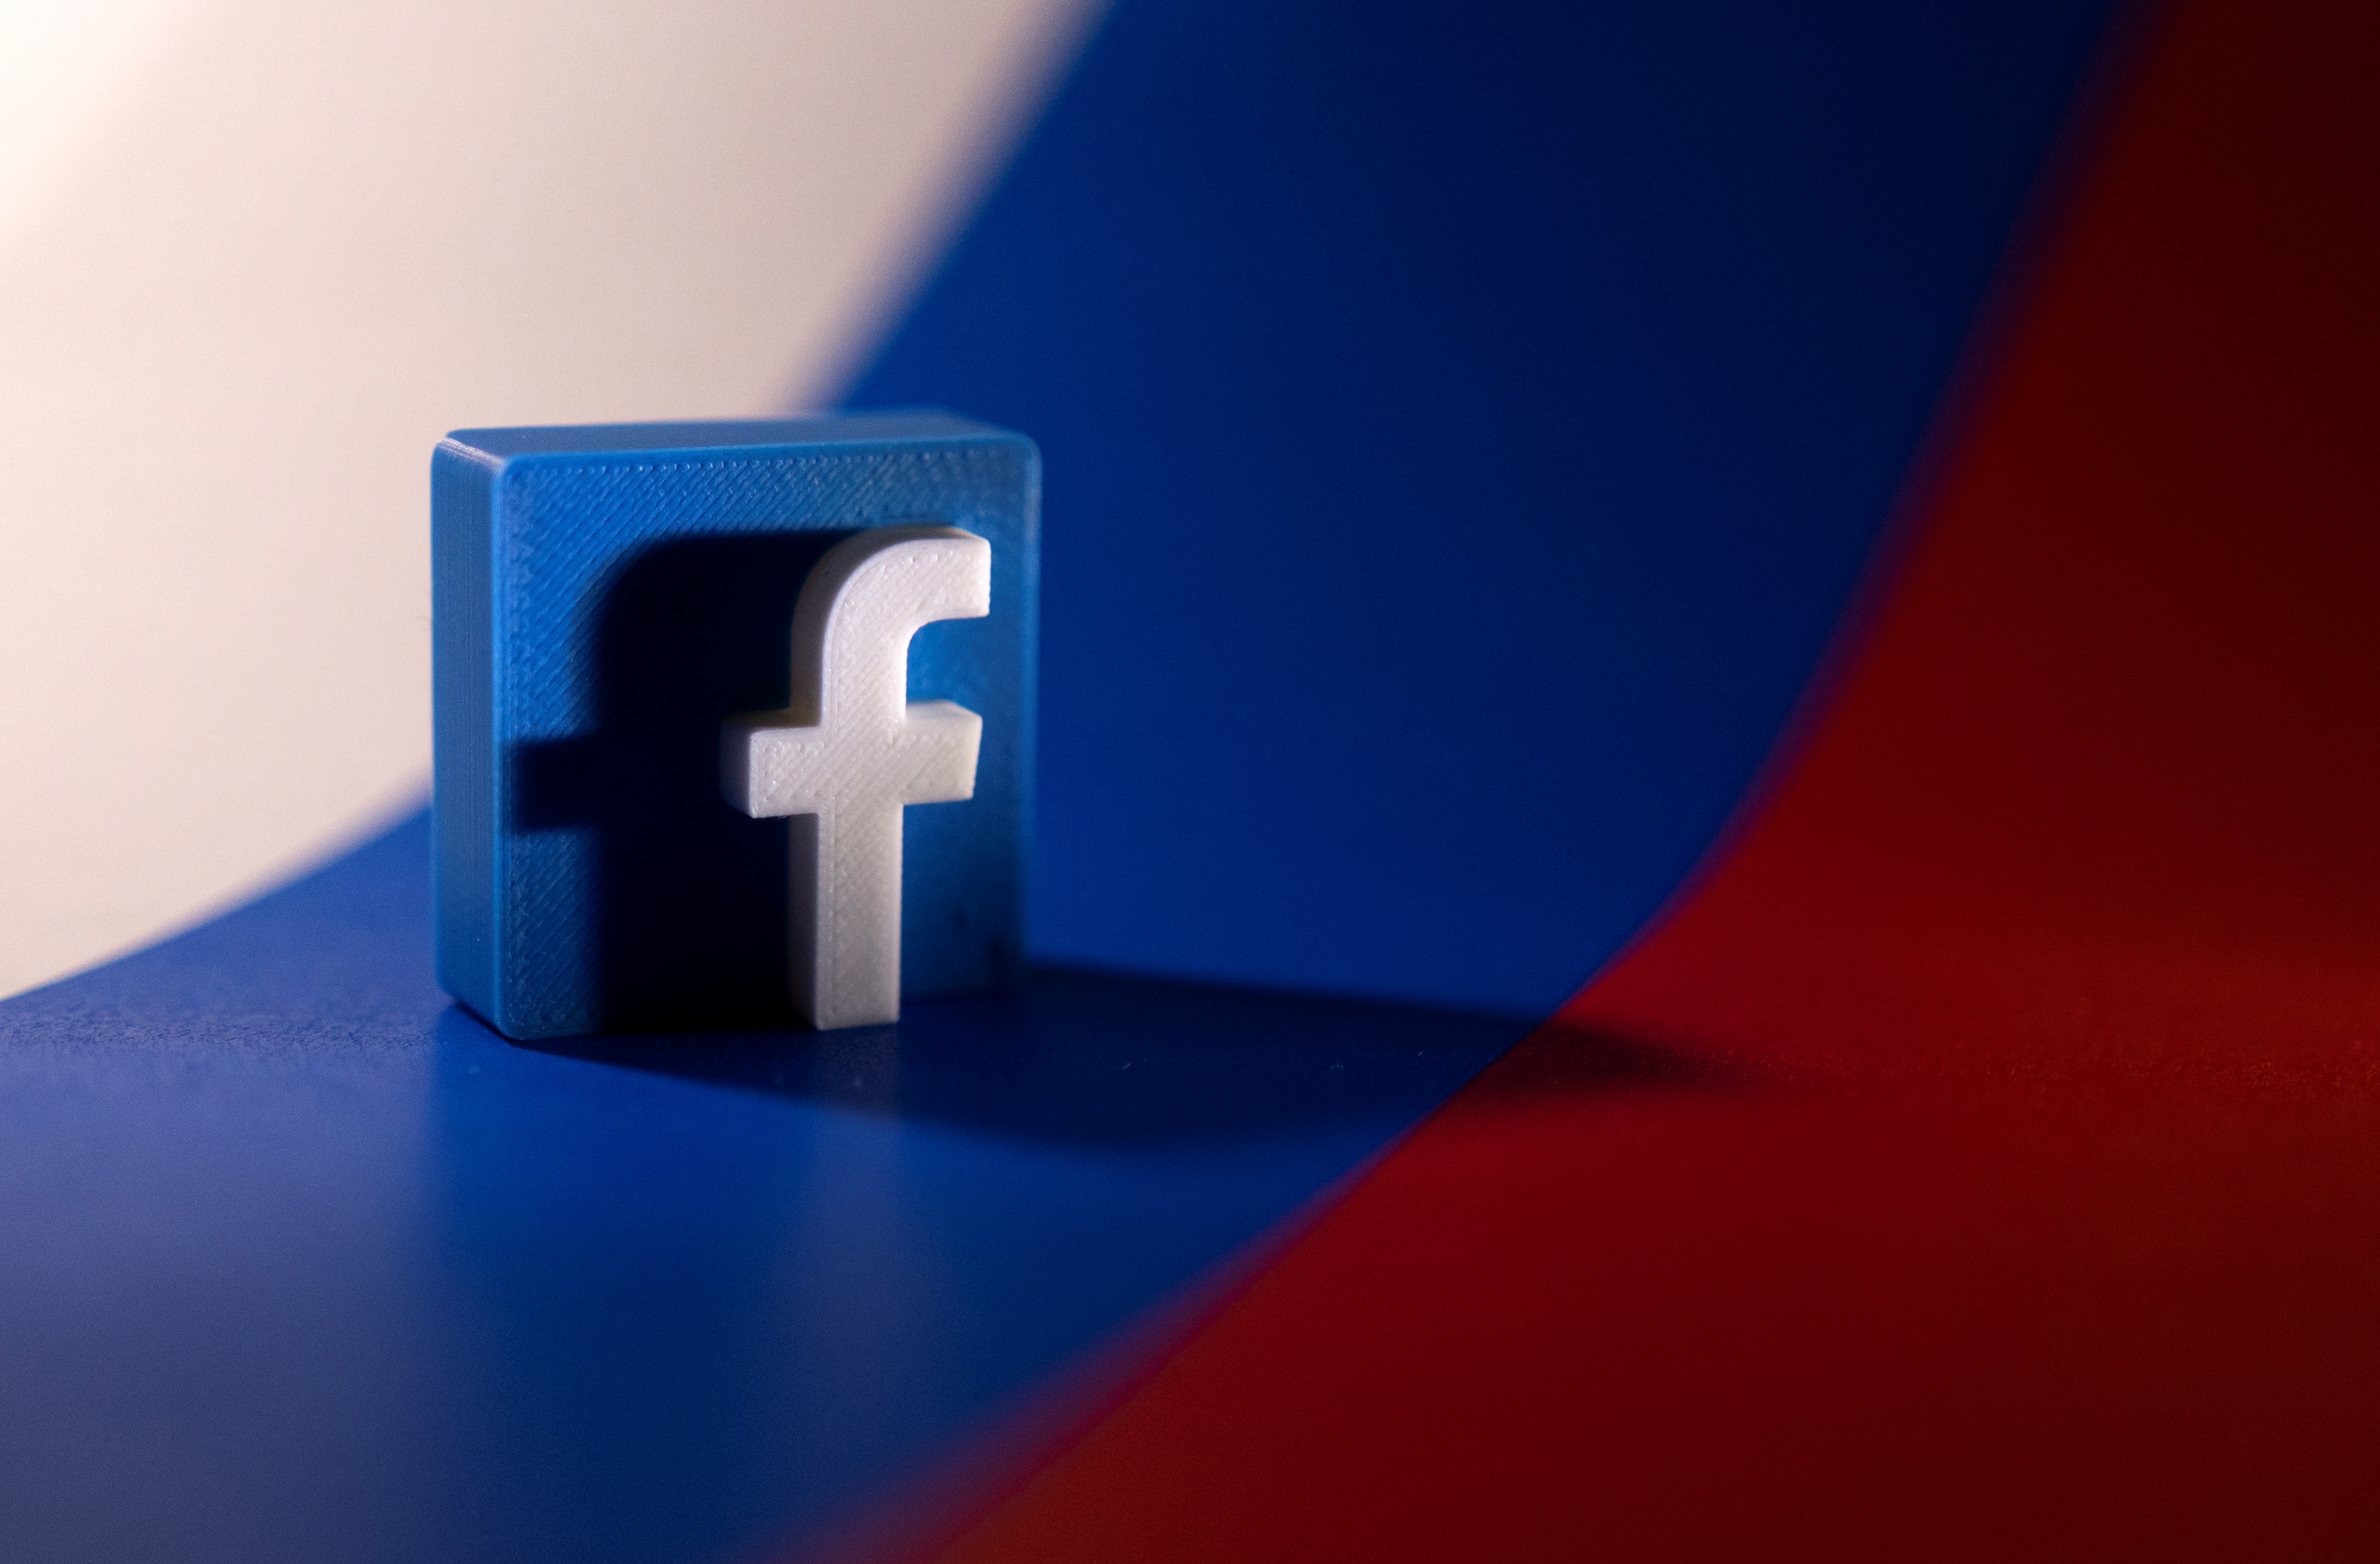 Russia blocks Facebook, accusing it of restricting access to Russian media  | Reuters